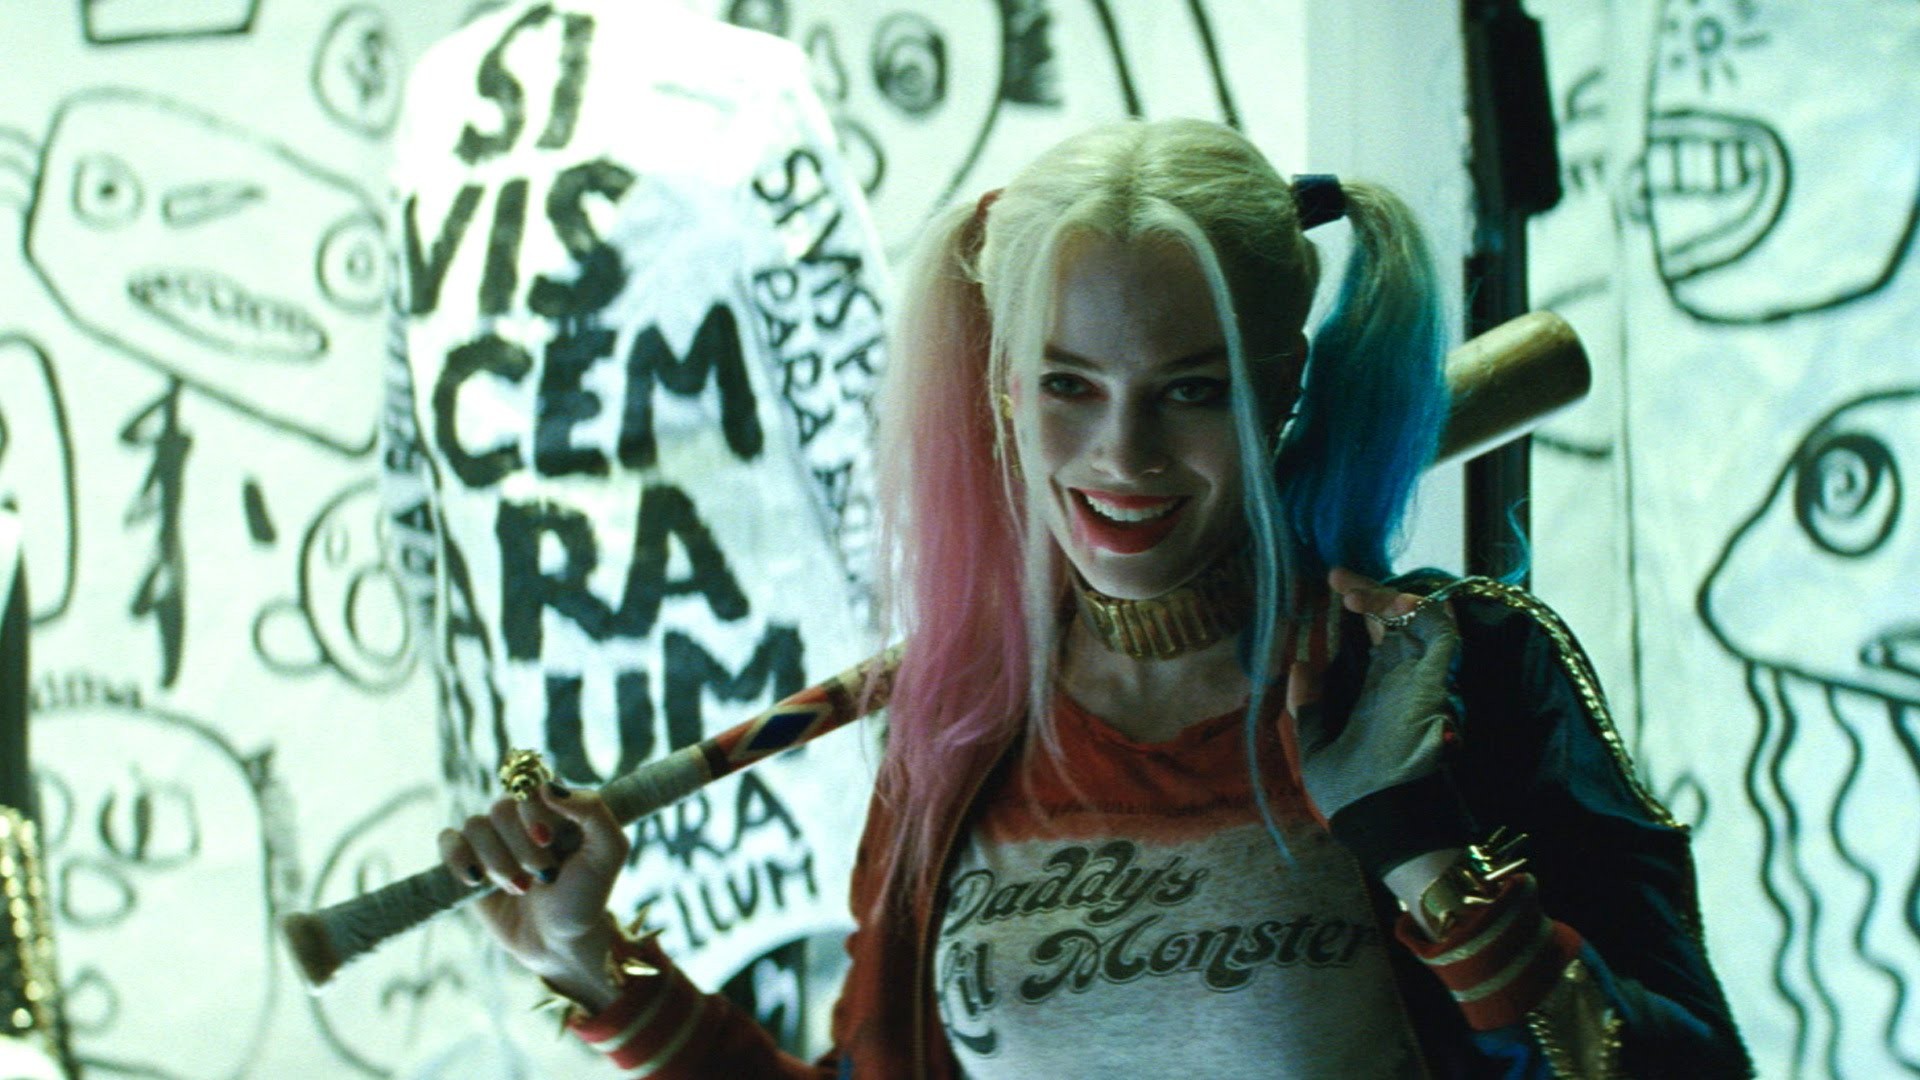 Best Harley Quinn Pictures Wallpaper with image resolution 1920x1080 pixel. You can use this wallpaper as background for your desktop Computer Screensavers, Android or iPhone smartphones